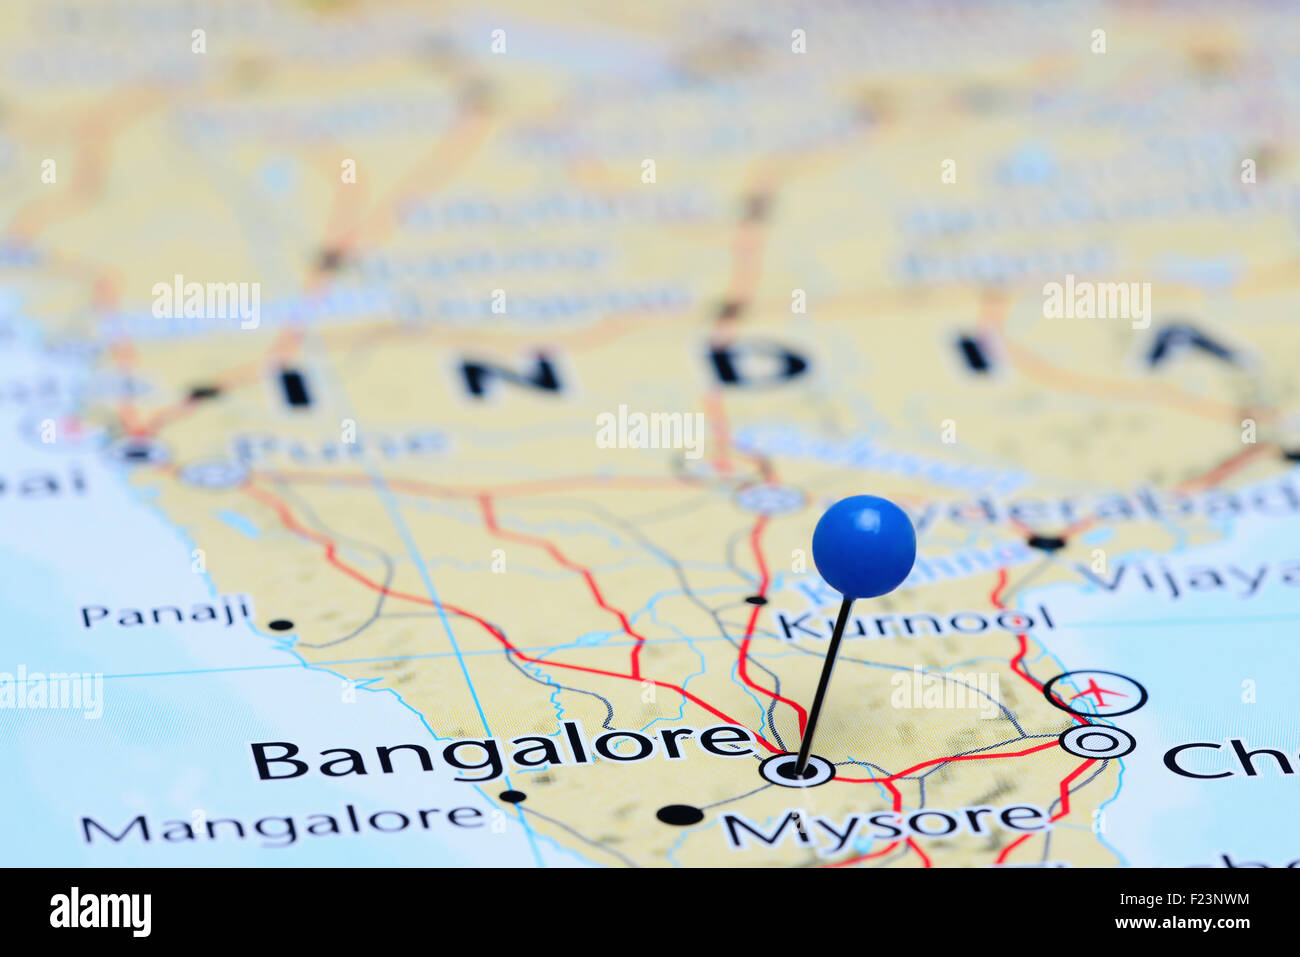 Bangalore pinned on a map of Asia Stock Photo